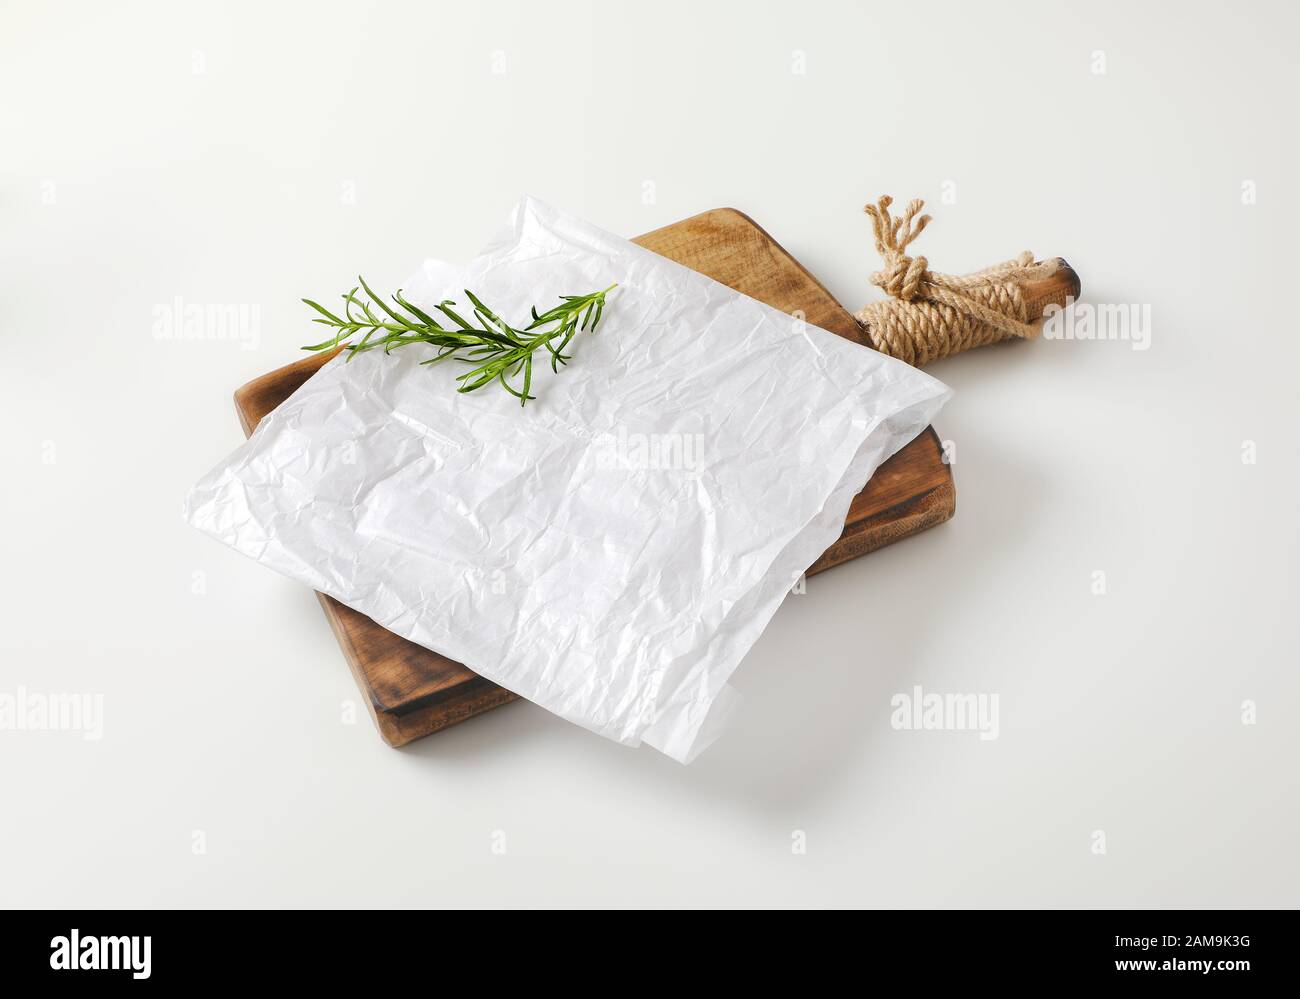 https://c8.alamy.com/comp/2AM9K3G/creased-sheet-of-white-wax-paper-and-fresh-rosemary-on-cutting-board-2AM9K3G.jpg